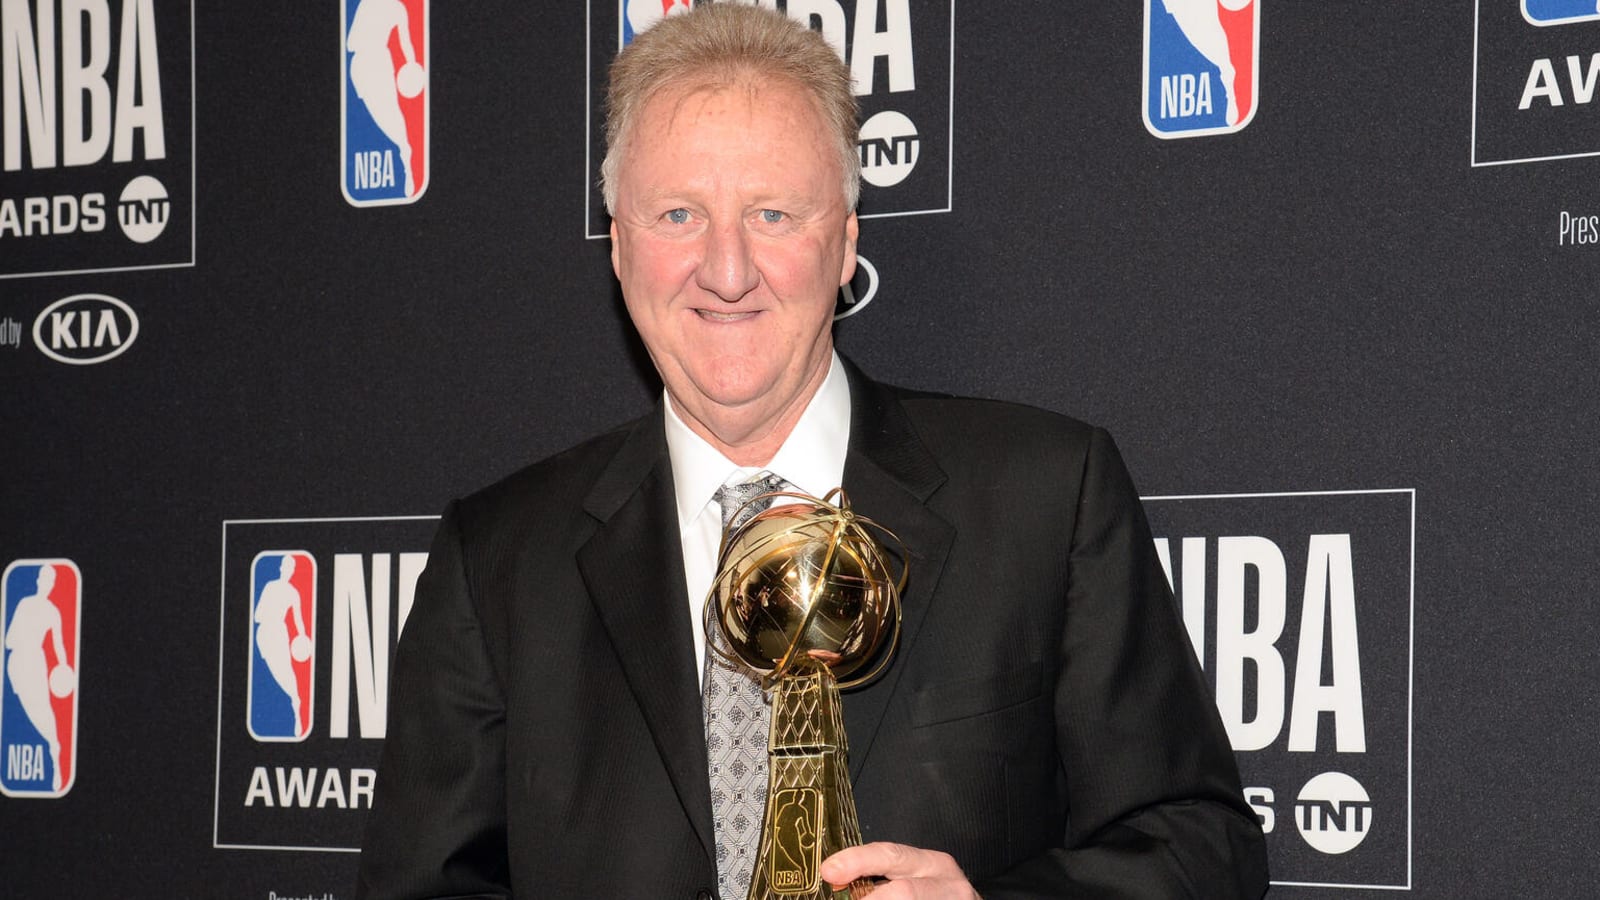 NBA names postseason trophies after four Hall of Famers